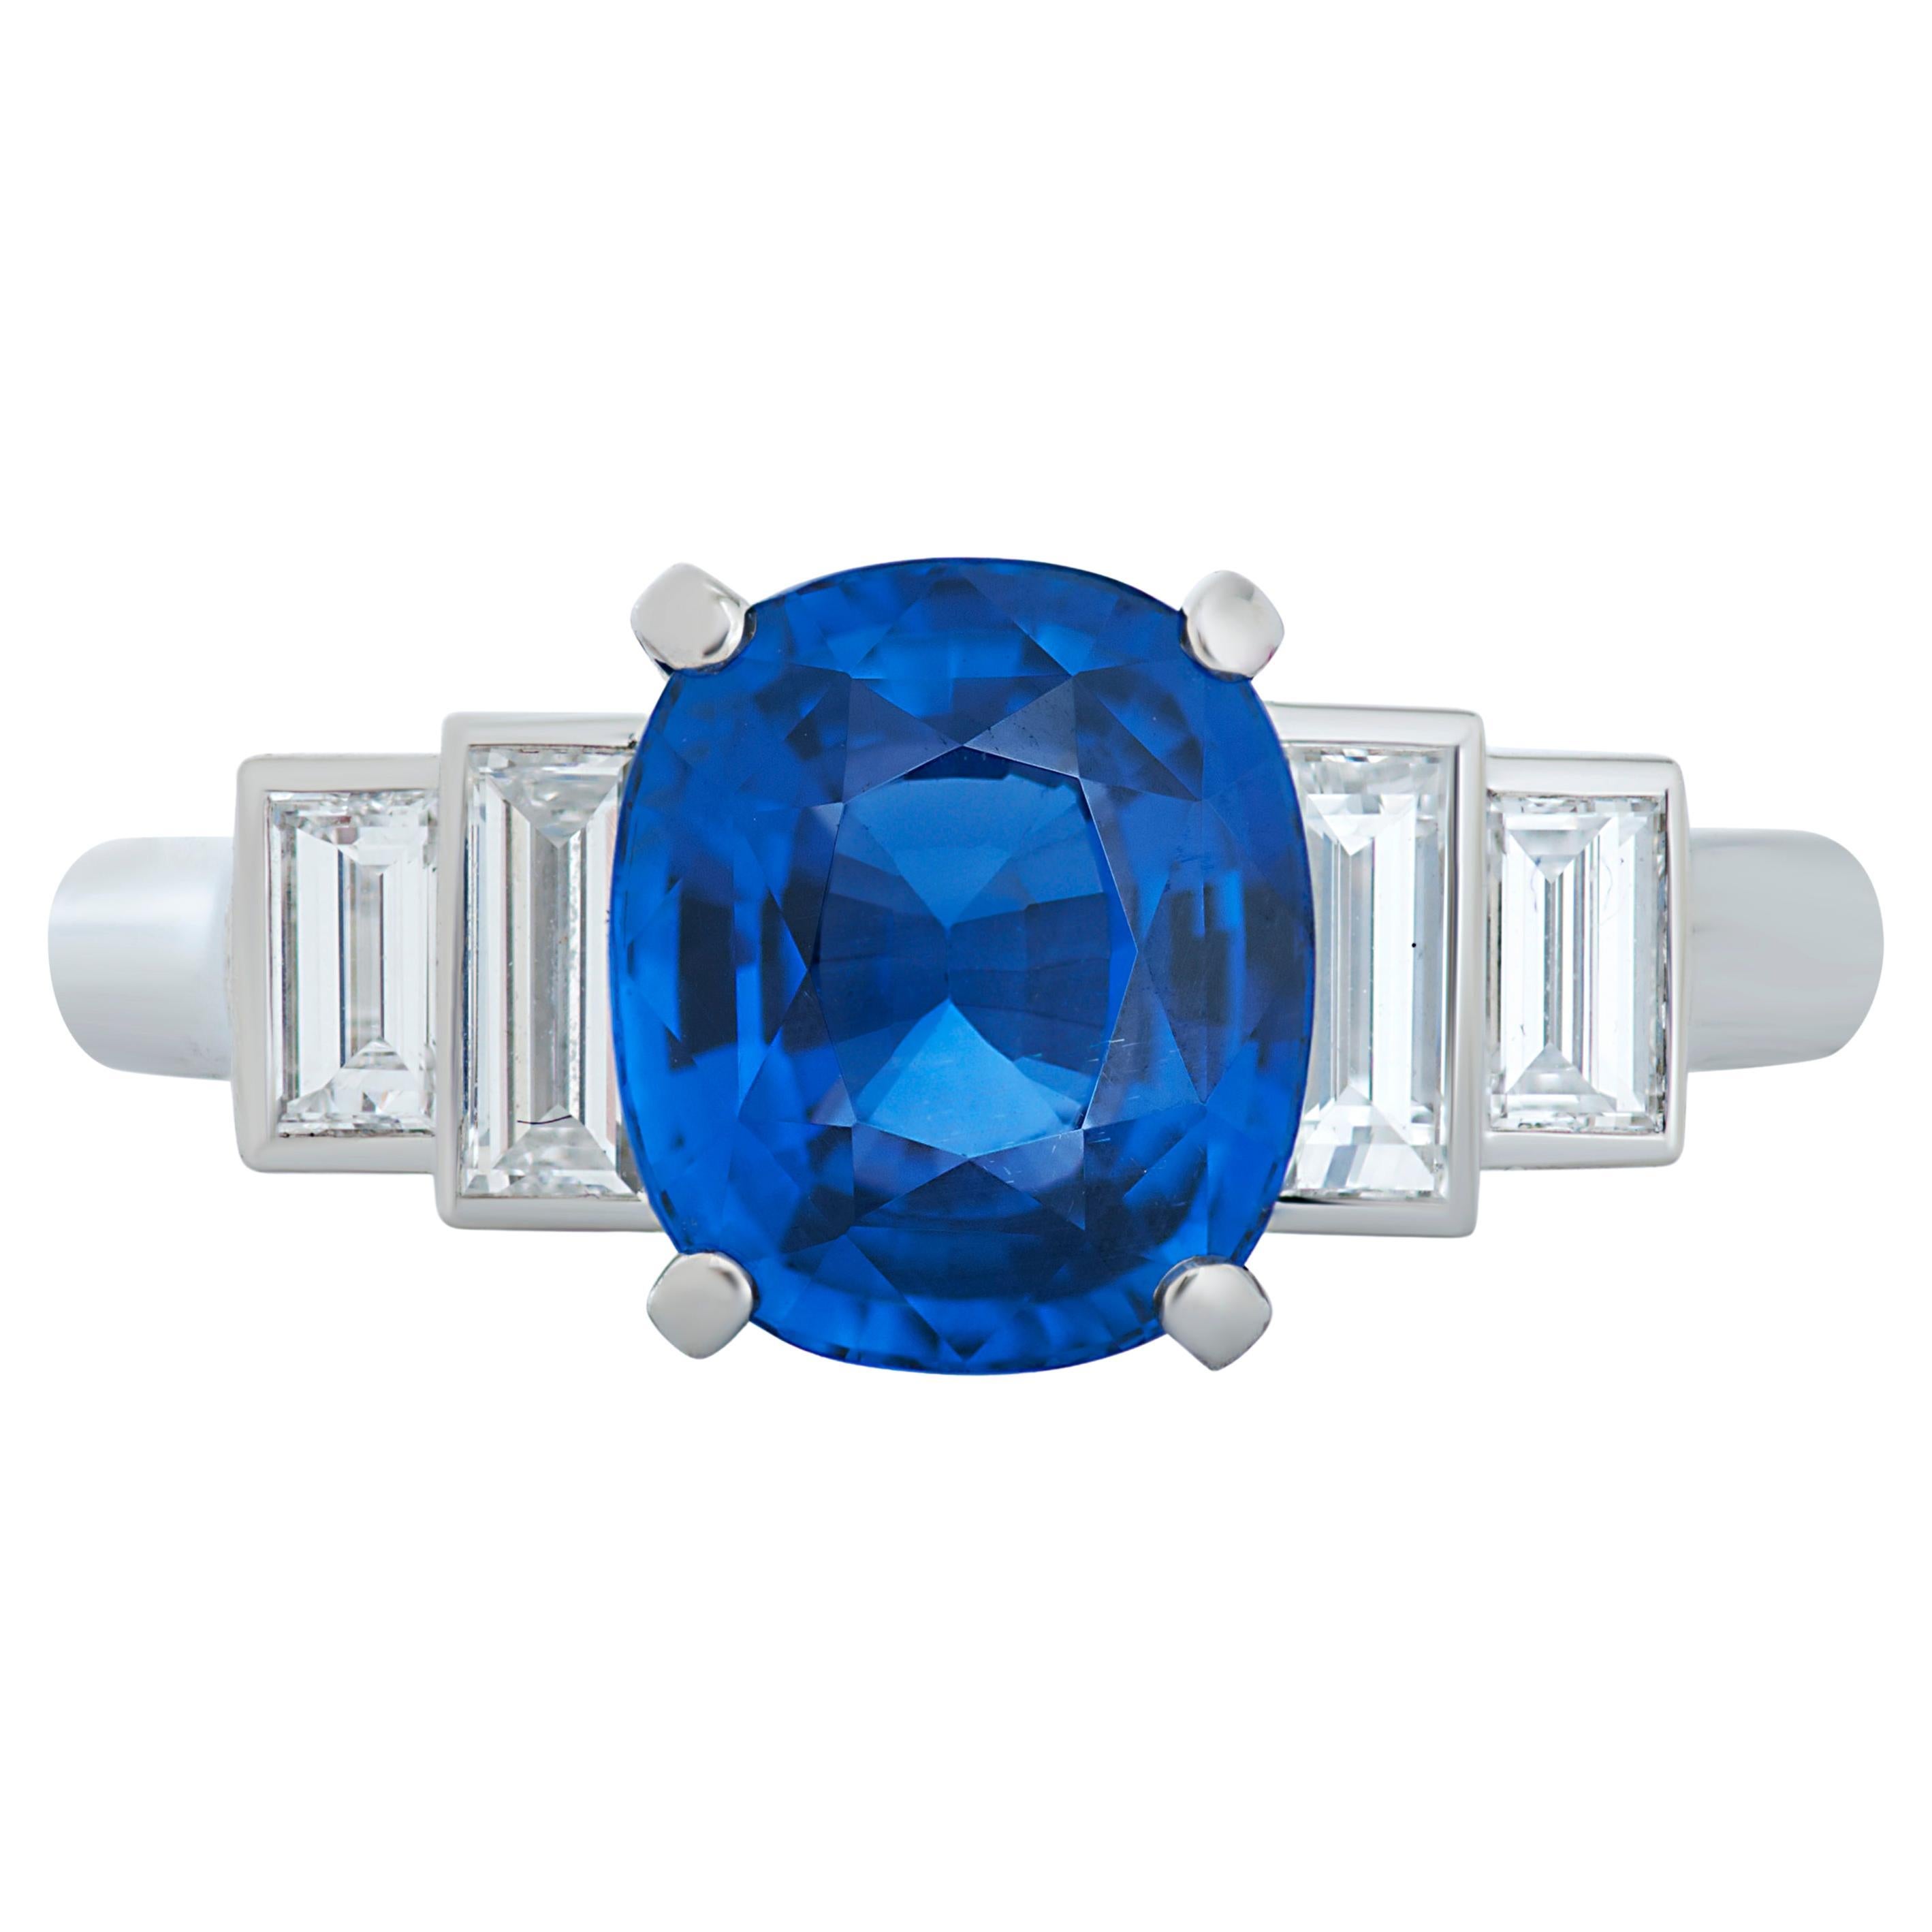 Cartier 3.00 Carat Unheated Madagascar Sapphire and Diamond Ring in Platinum For Sale